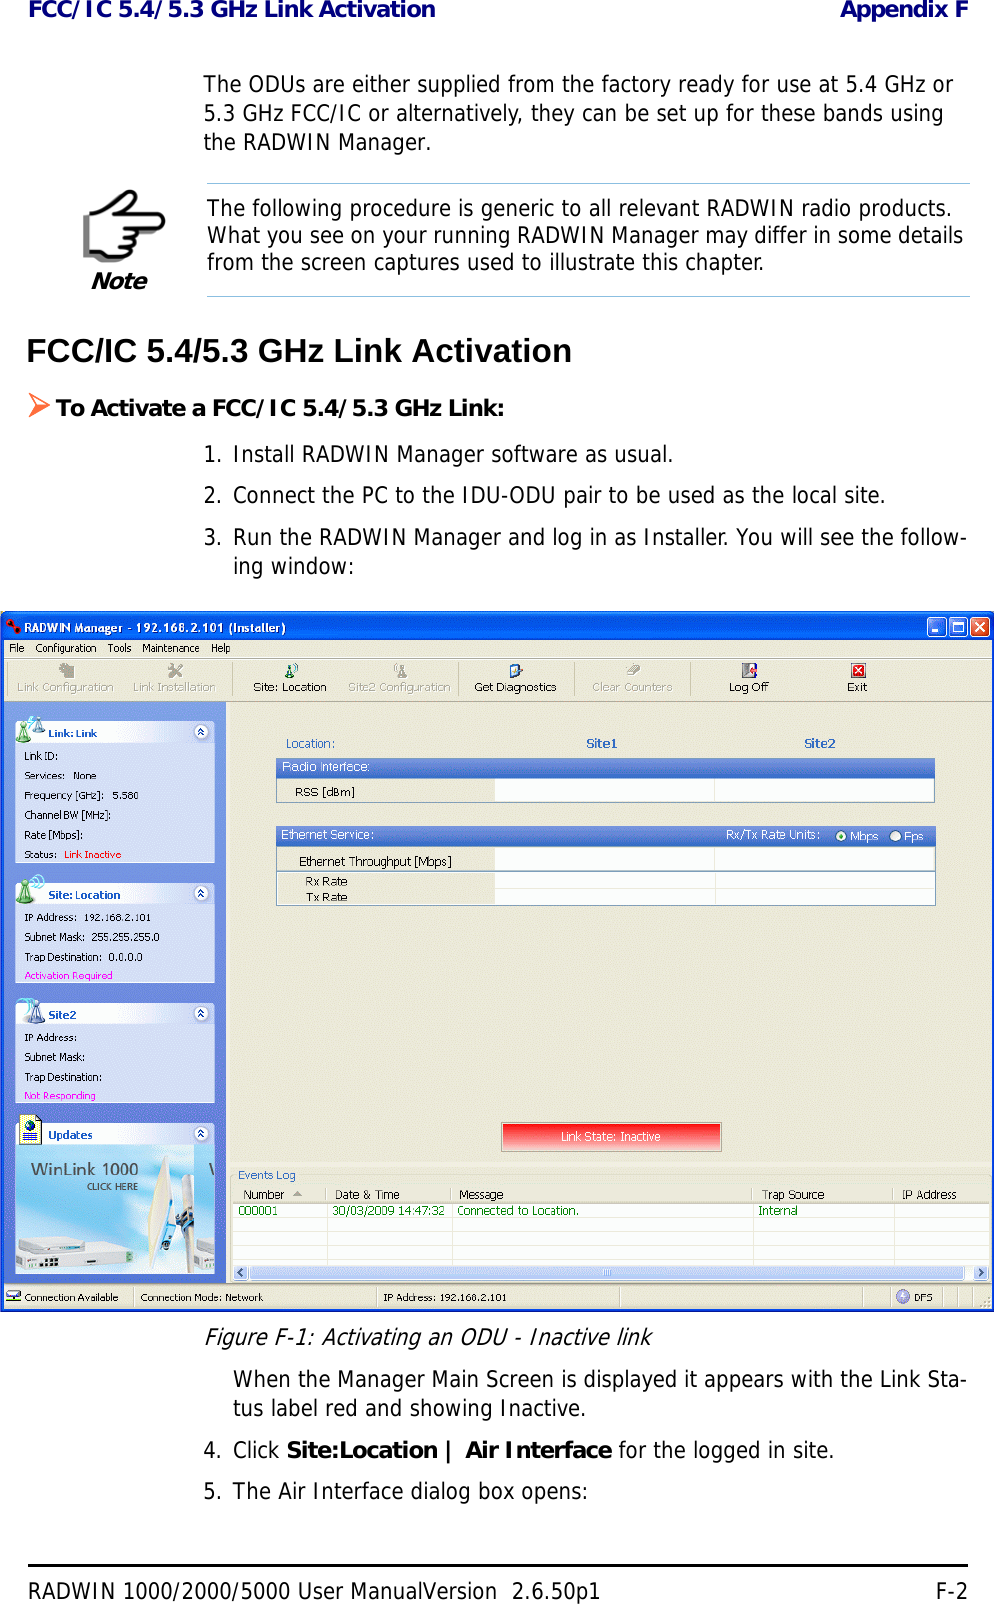 FCC/IC 5.4/5.3 GHz Link Activation Appendix FRADWIN 1000/2000/5000 User ManualVersion  2.6.50p1 F-2The ODUs are either supplied from the factory ready for use at 5.4 GHz or 5.3 GHz FCC/IC or alternatively, they can be set up for these bands using the RADWIN Manager.FCC/IC 5.4/5.3 GHz Link ActivationTo Activate a FCC/IC 5.4/5.3 GHz Link:1. Install RADWIN Manager software as usual.2. Connect the PC to the IDU-ODU pair to be used as the local site.3. Run the RADWIN Manager and log in as Installer. You will see the follow-ing window:Figure F-1: Activating an ODU - Inactive linkWhen the Manager Main Screen is displayed it appears with the Link Sta-tus label red and showing Inactive.4. Click Site:Location | Air Interface for the logged in site.5. The Air Interface dialog box opens:NoteThe following procedure is generic to all relevant RADWIN radio products. What you see on your running RADWIN Manager may differ in some details from the screen captures used to illustrate this chapter.